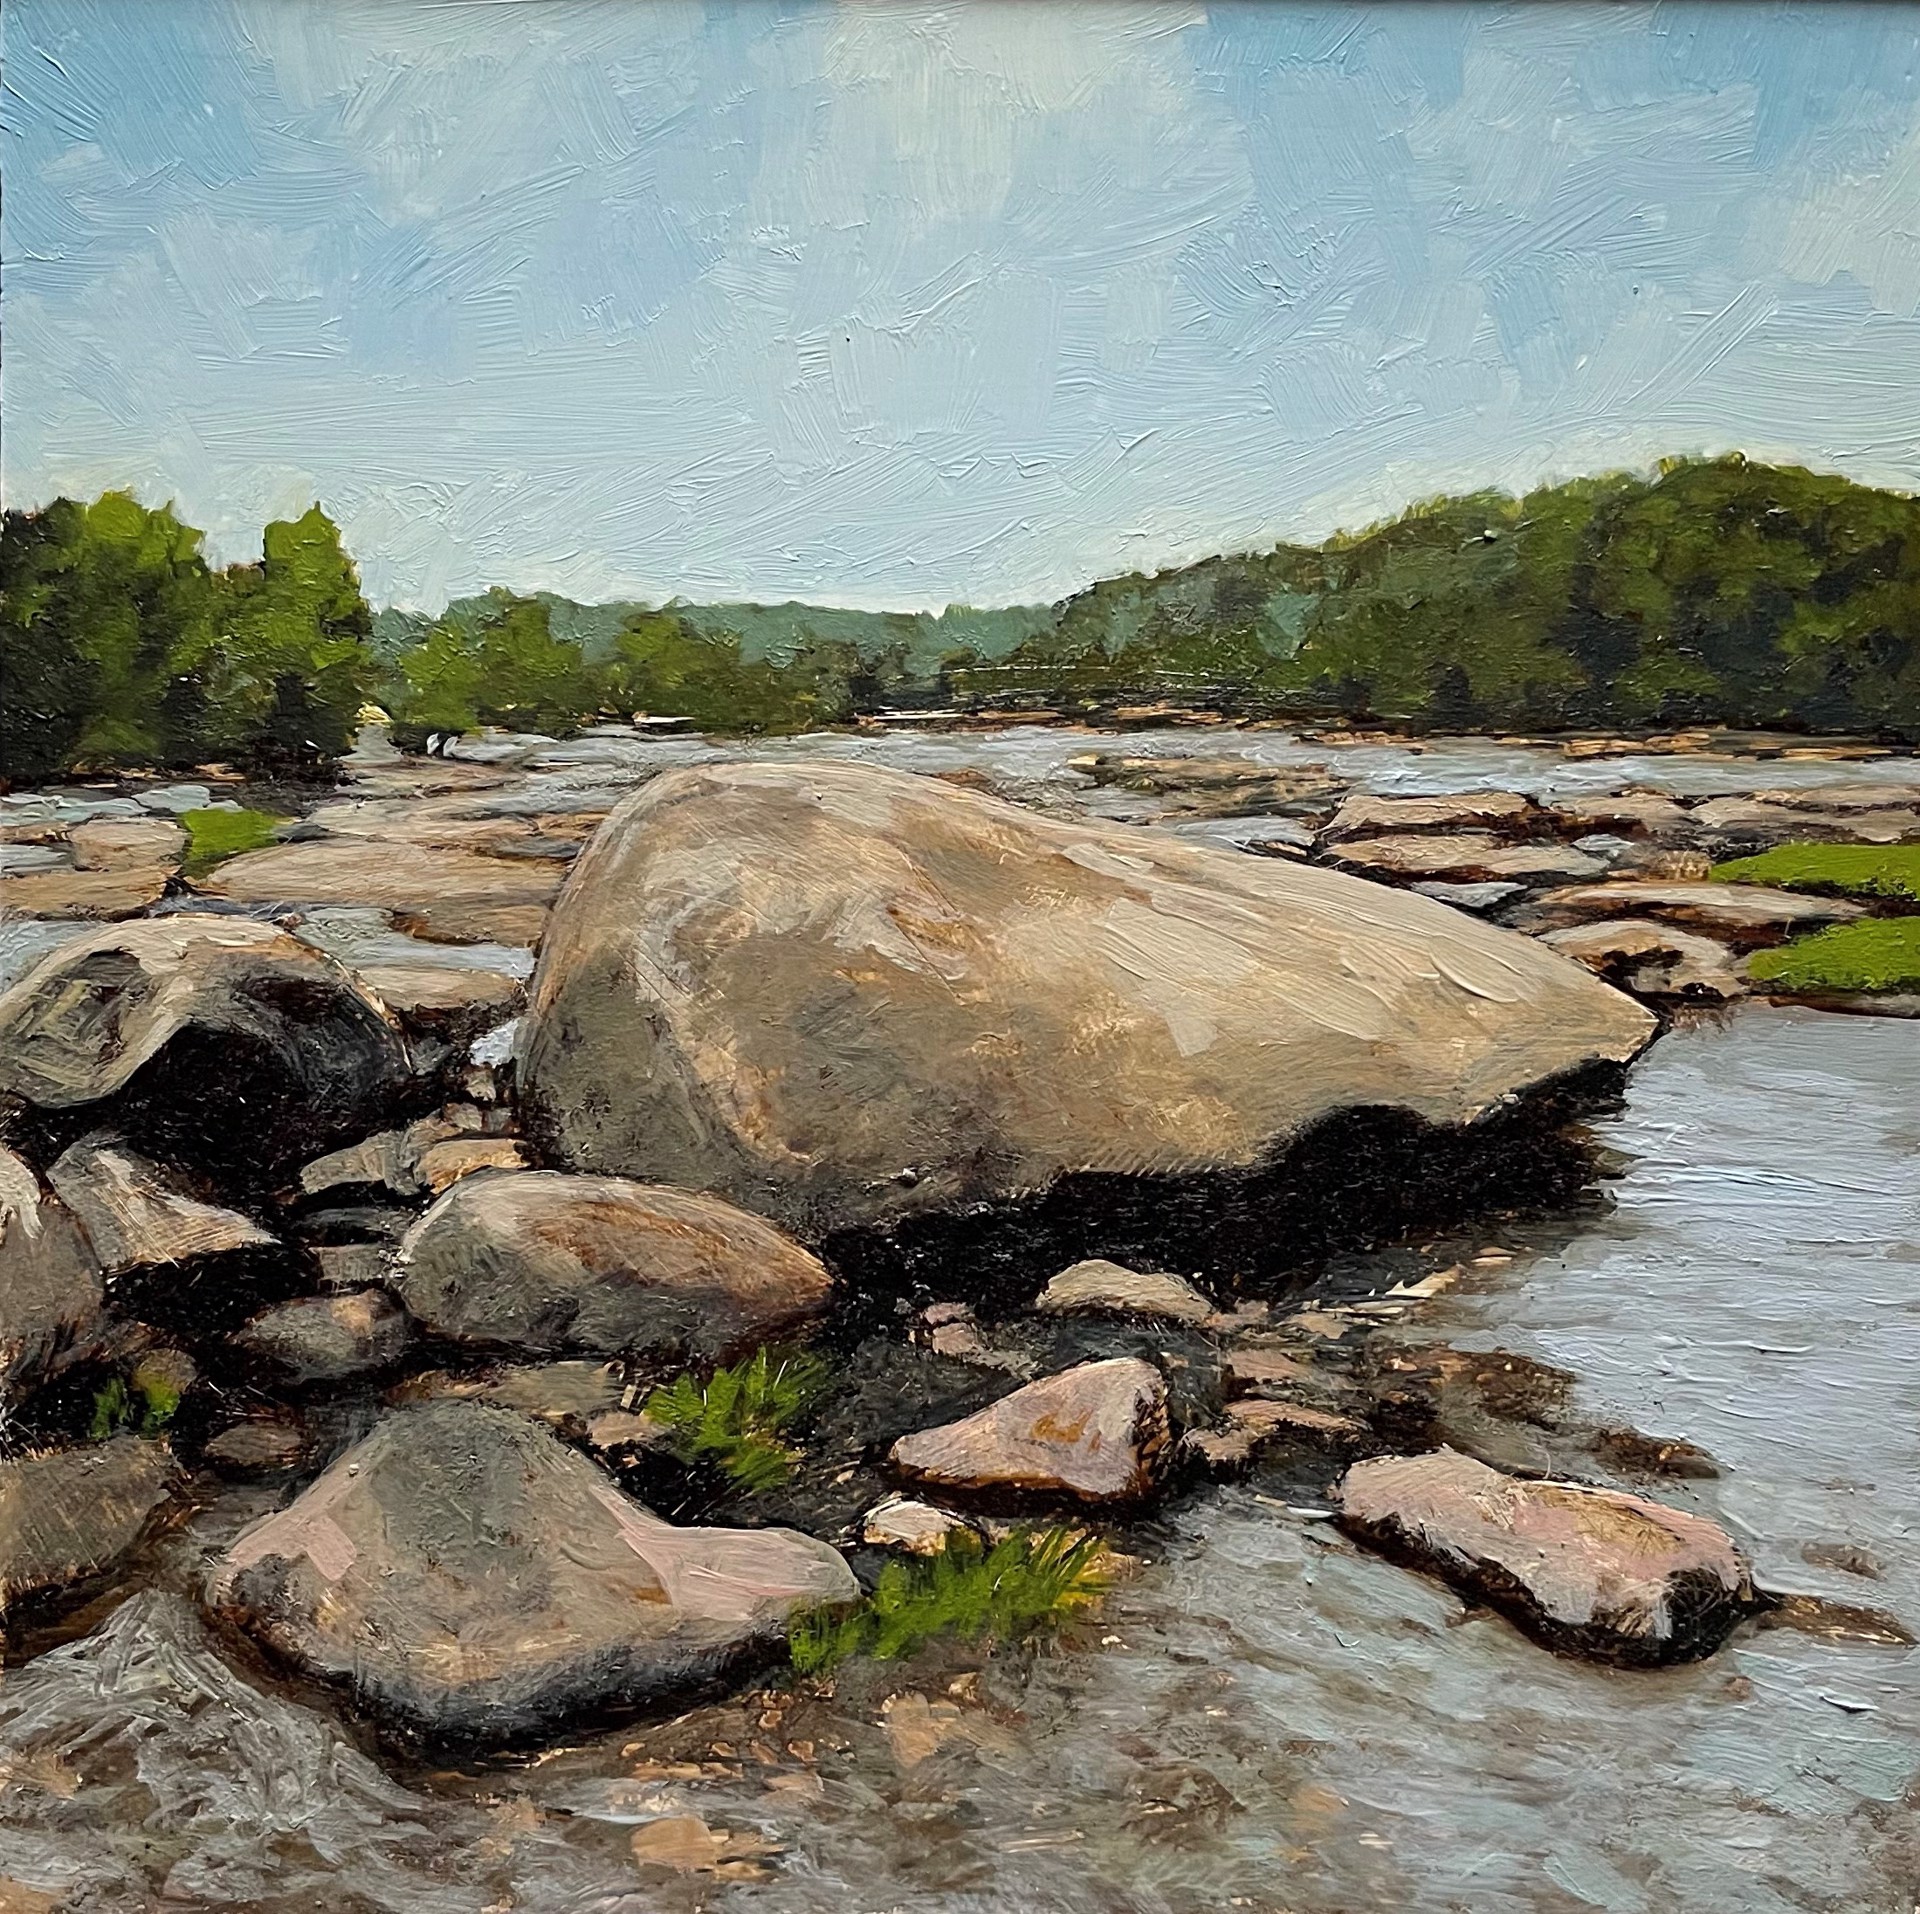 Pony Pasture From the Rocks by Matt Lively